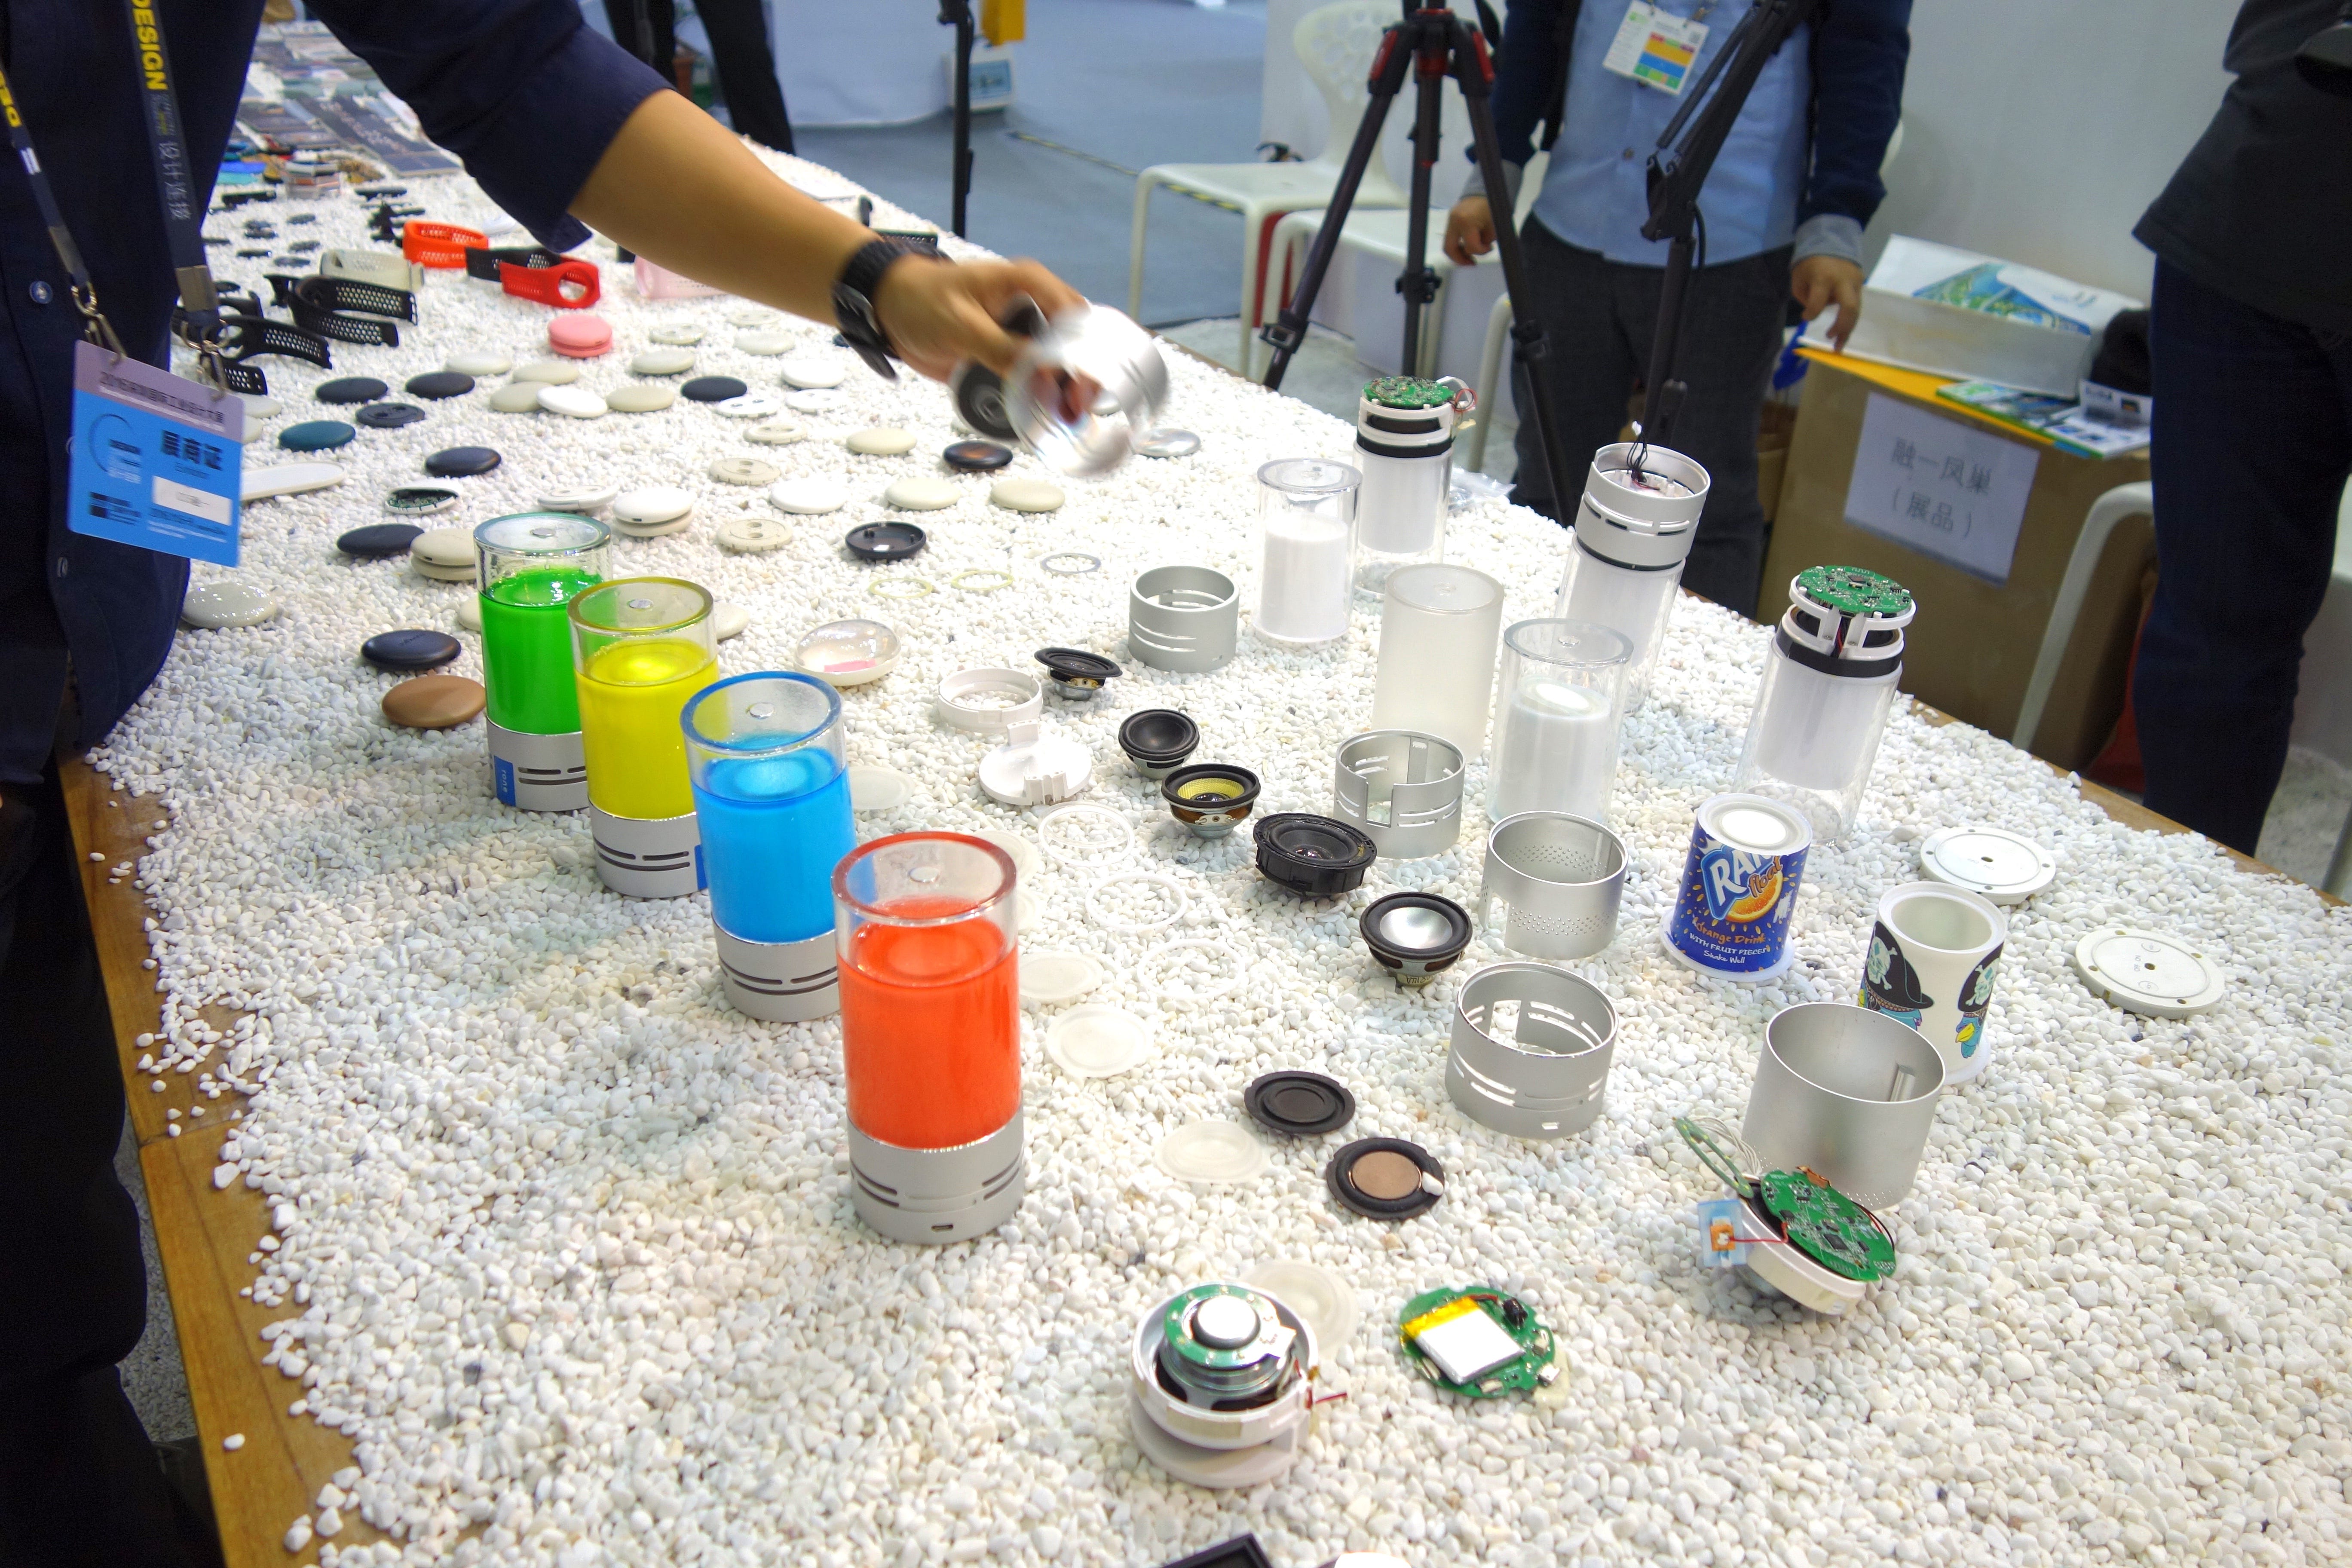 At the Shenzhen Industrial Design Fair (Nov 2016), a design house showed the components that make up some connected products. Image: Peter Bihr (CC by-nc-sa)